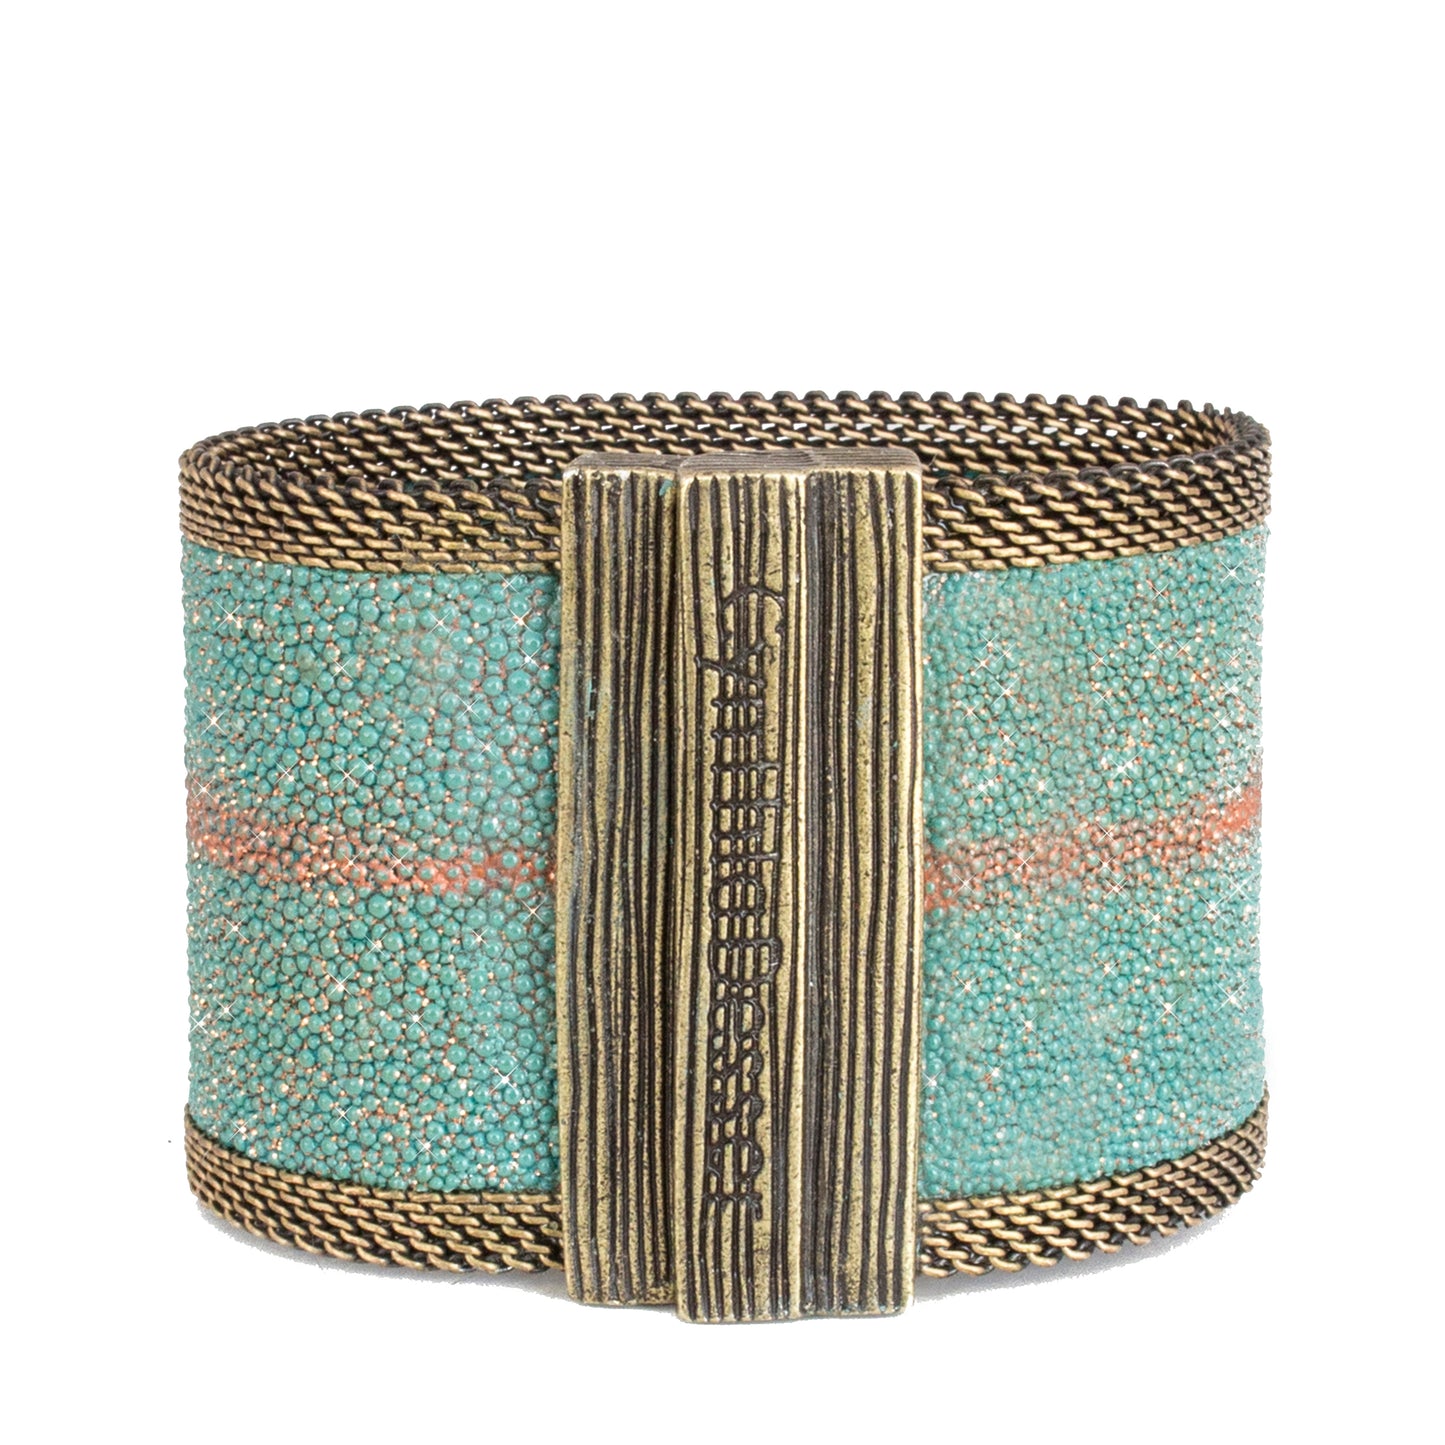 Wide Stingray Cuff in Shimmery Turquoise